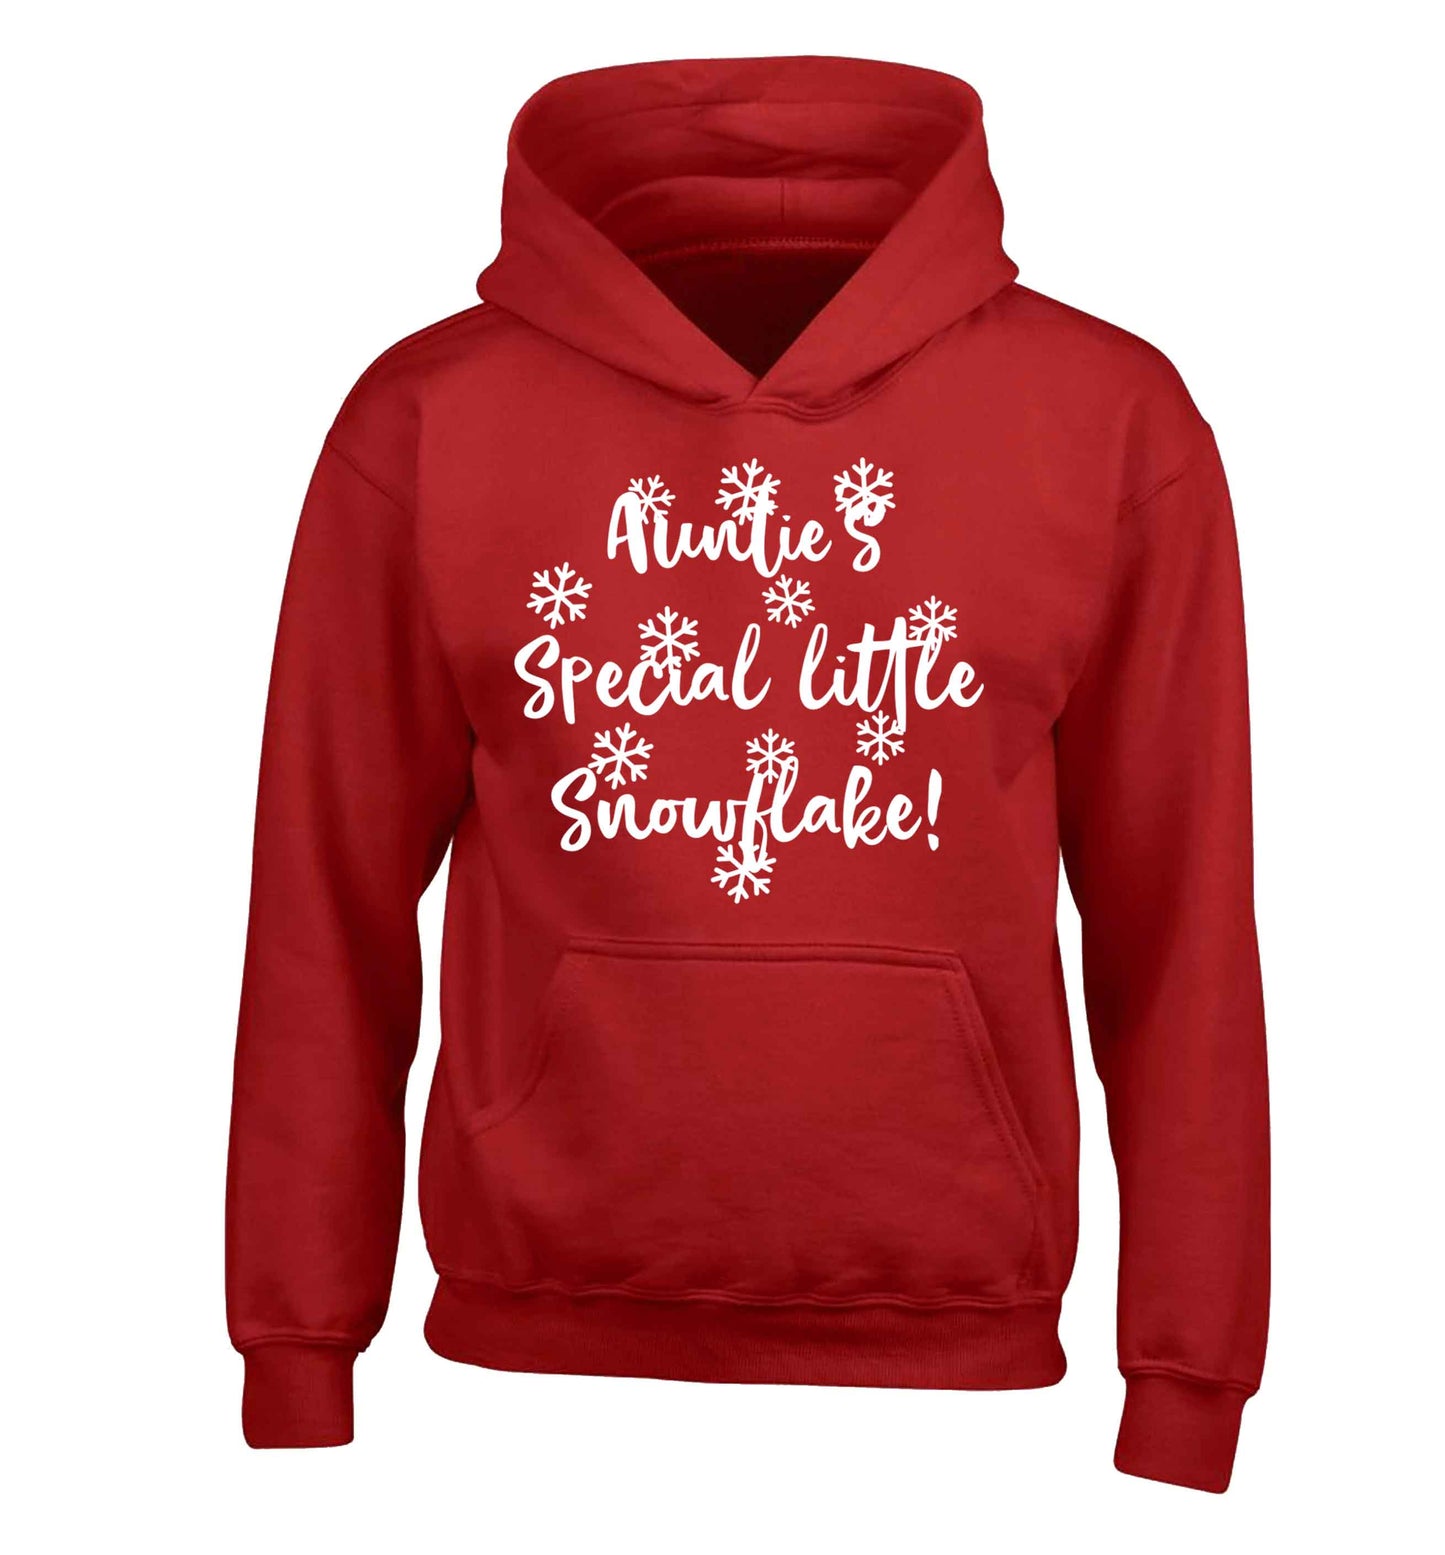 Auntie's special little snowflake children's red hoodie 12-13 Years